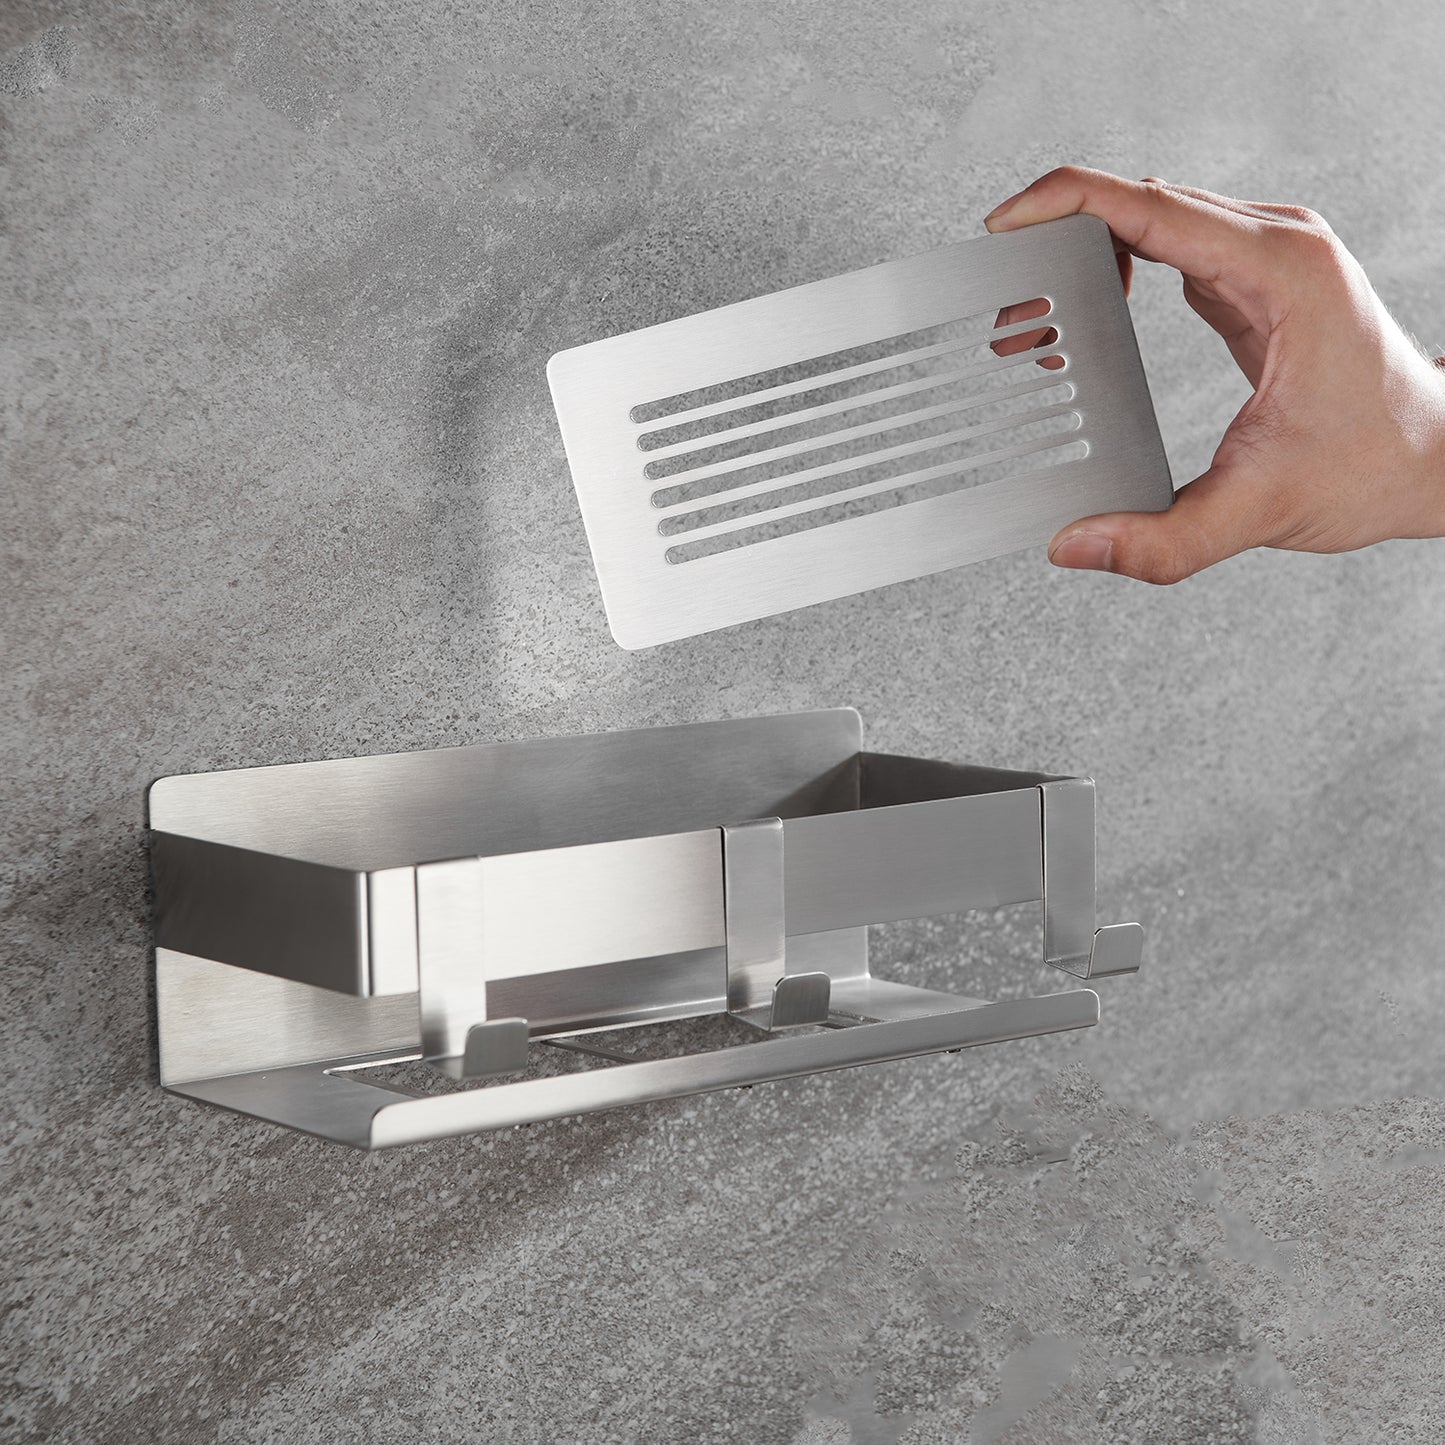 DEKAZIA® shower shelf made of stainless steel without drilling | in 3 colors